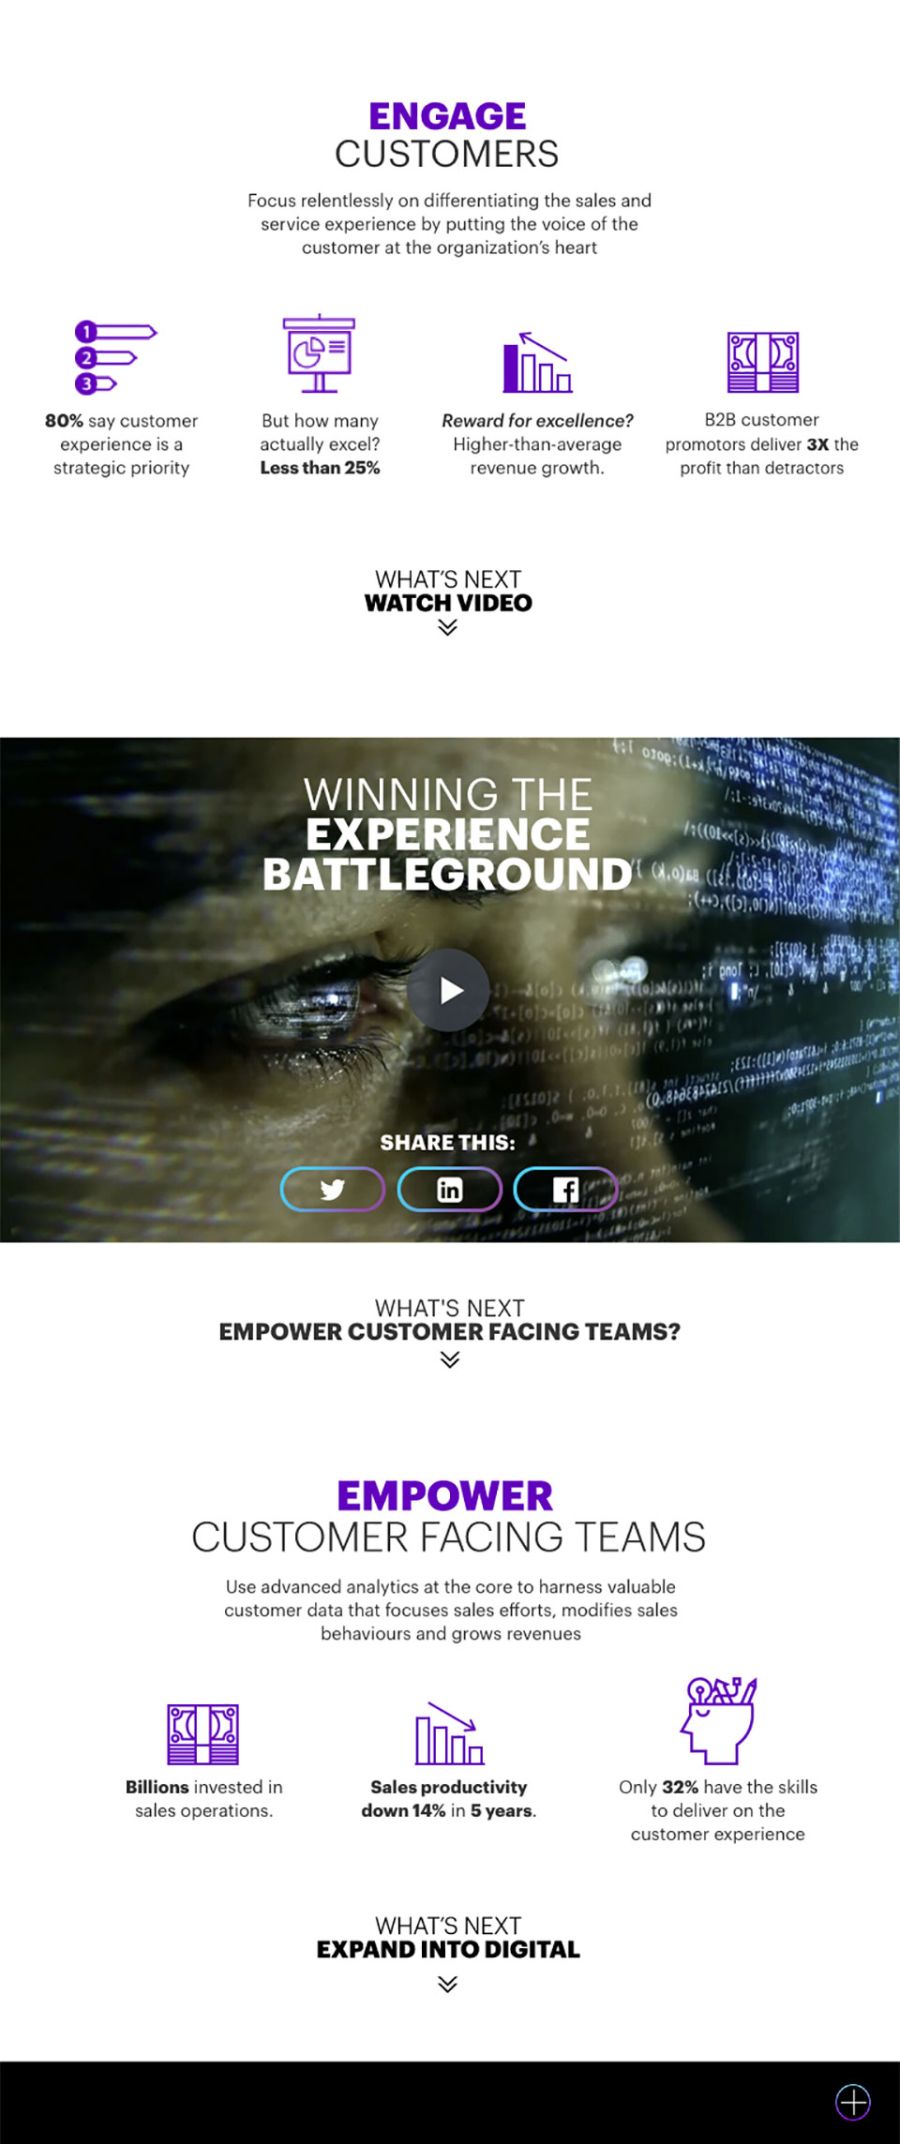 Accenture - Engage